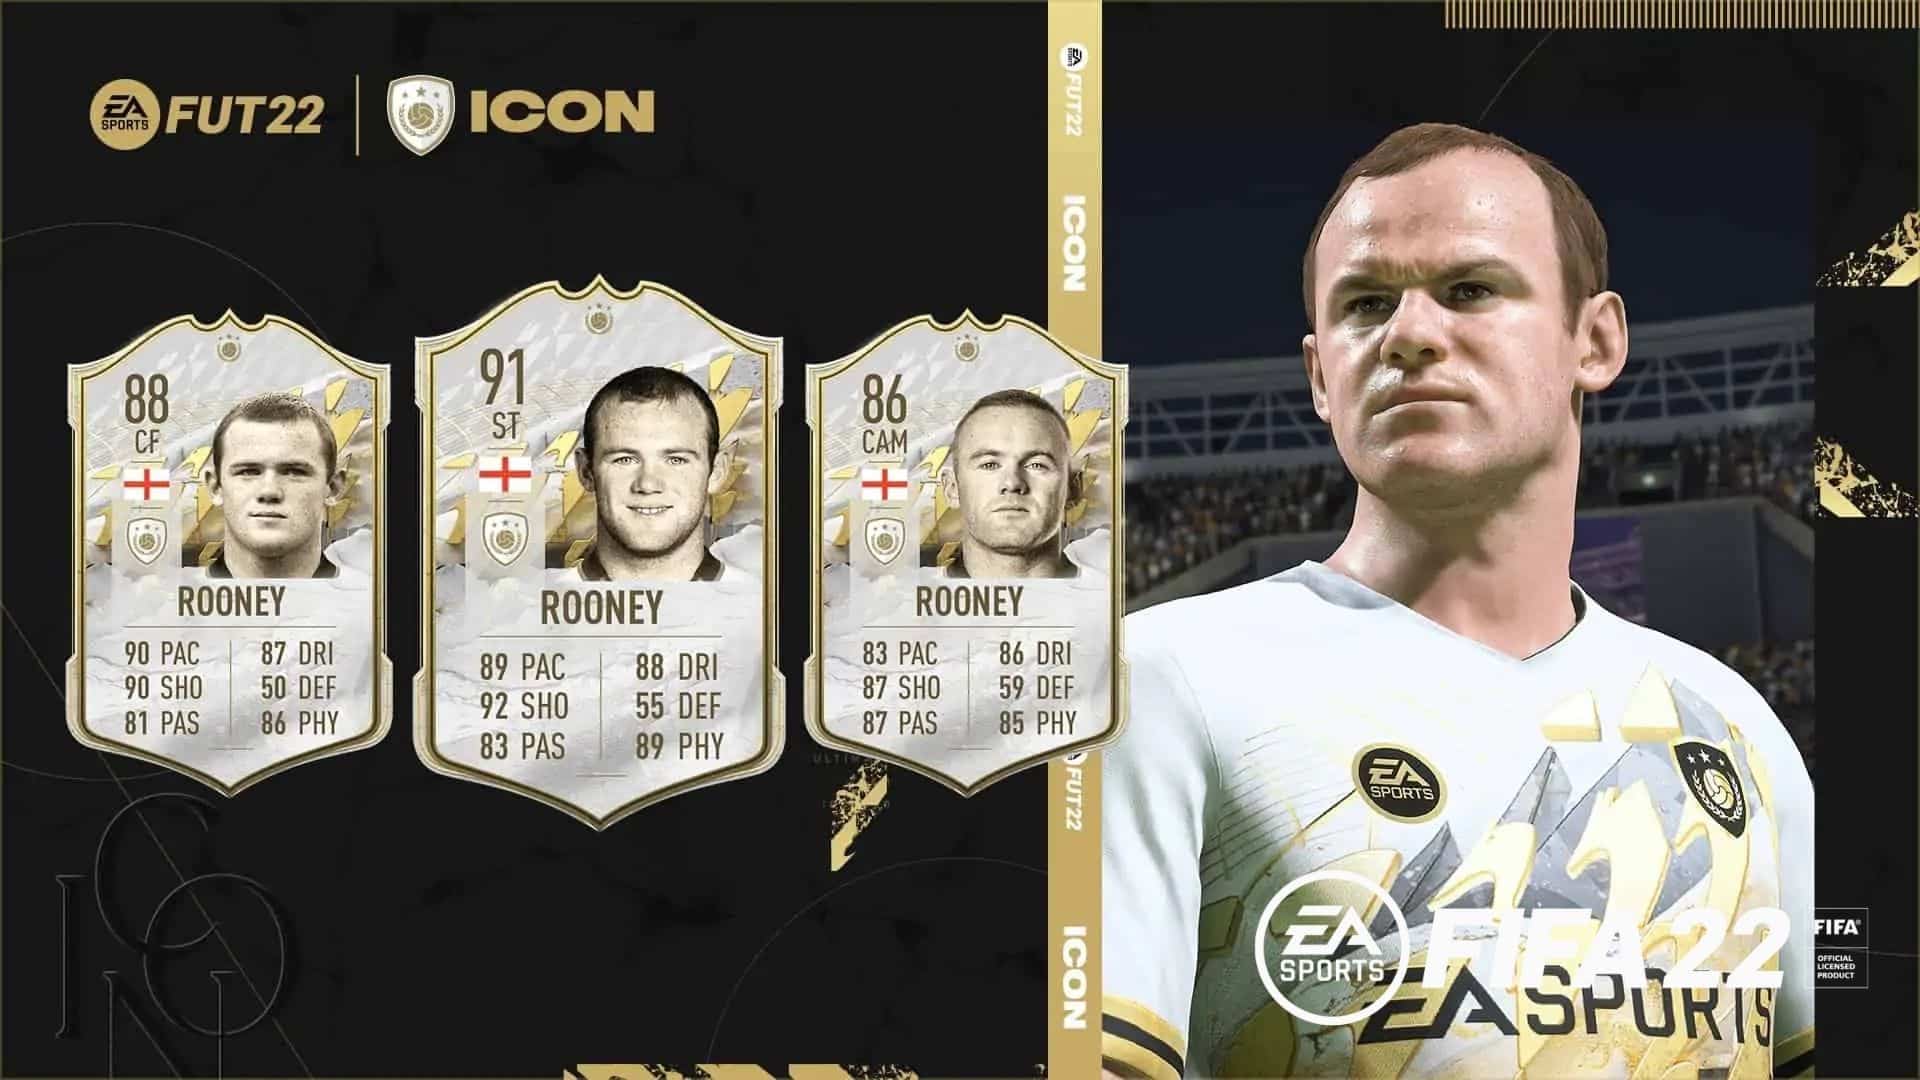 FIFA 23: Which FUT Icons will be in the new game?